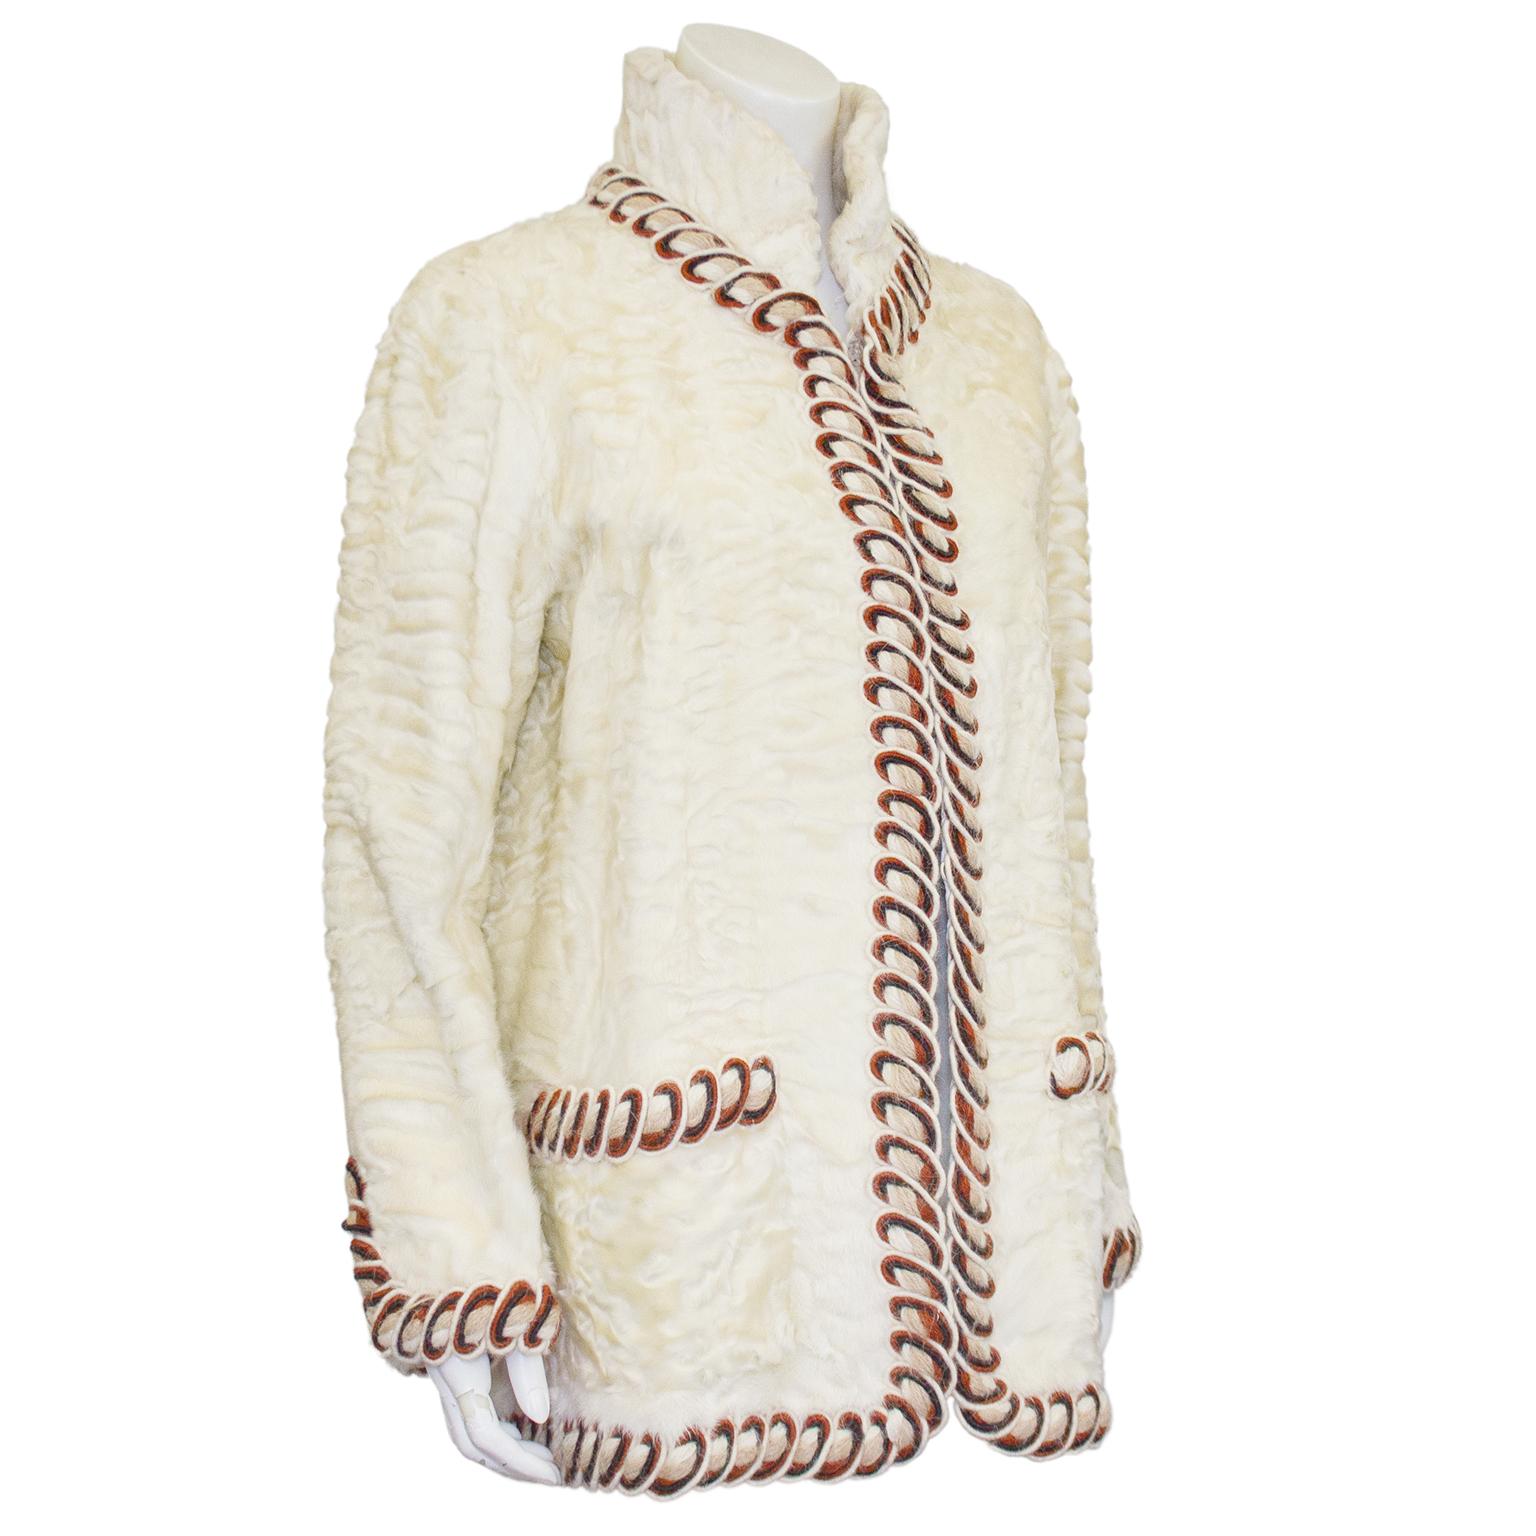 1980's Chanel Haute Couture off-white Persian Lamb jacket trimmed in burgundy and cream passementerie. High mandarin style collar can be worn fully extended or turned down for a less formal look. Provenance from a well known American 1950's cabaret